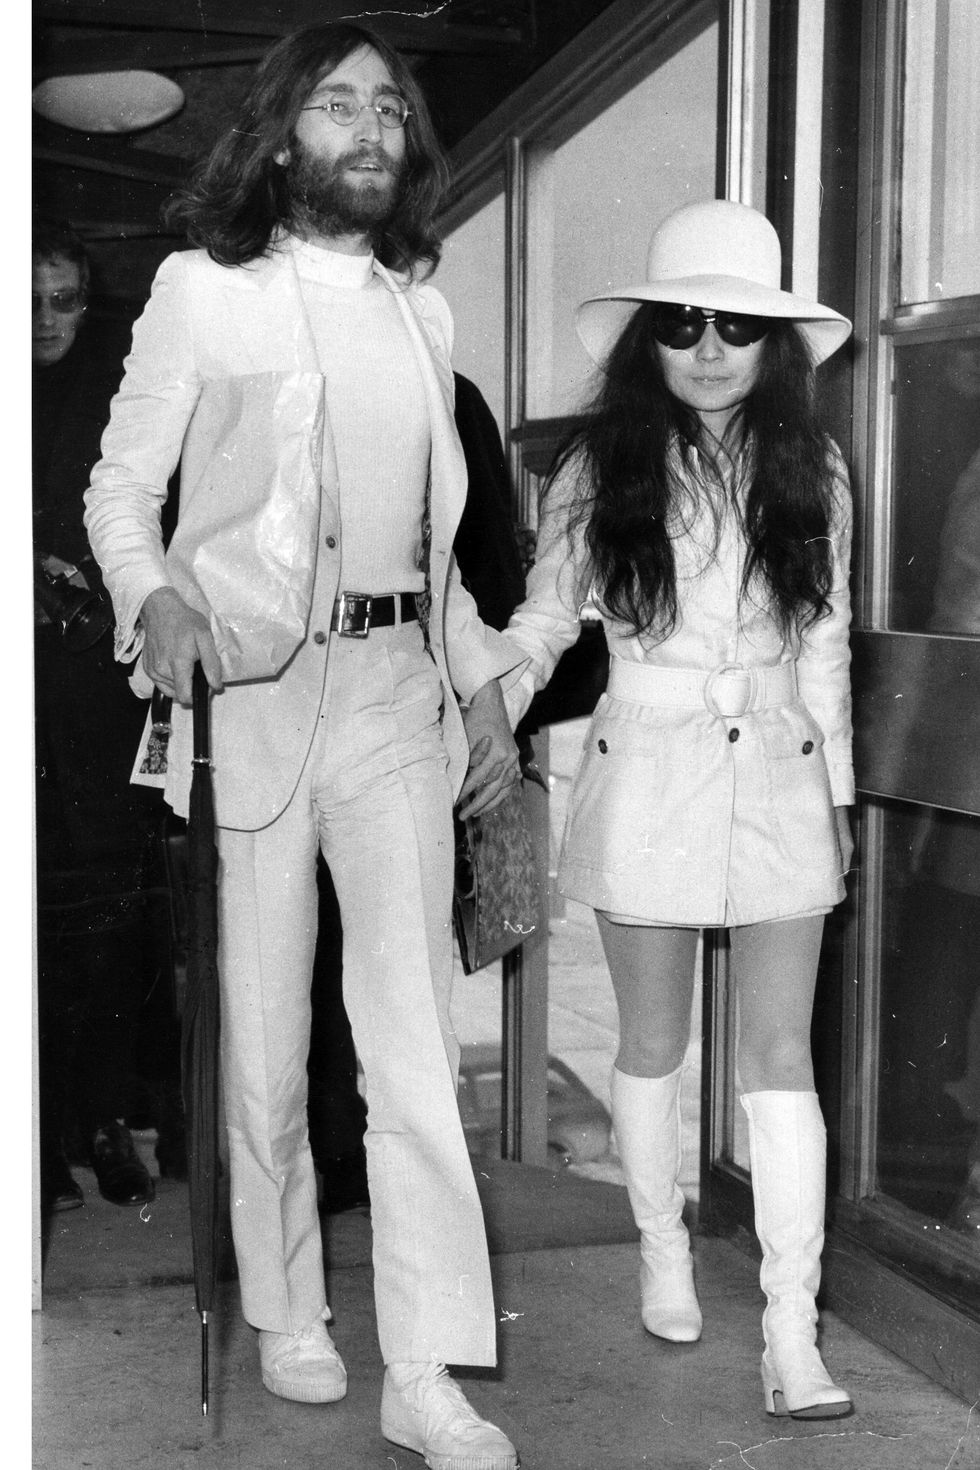 2nd April 1969:  Singer and songwriter John Lennon (1940 - 1980) and his wife artist Yoko Ono, both dressed in white at London Airport.  (Photo by Evening Standard/Getty Images)